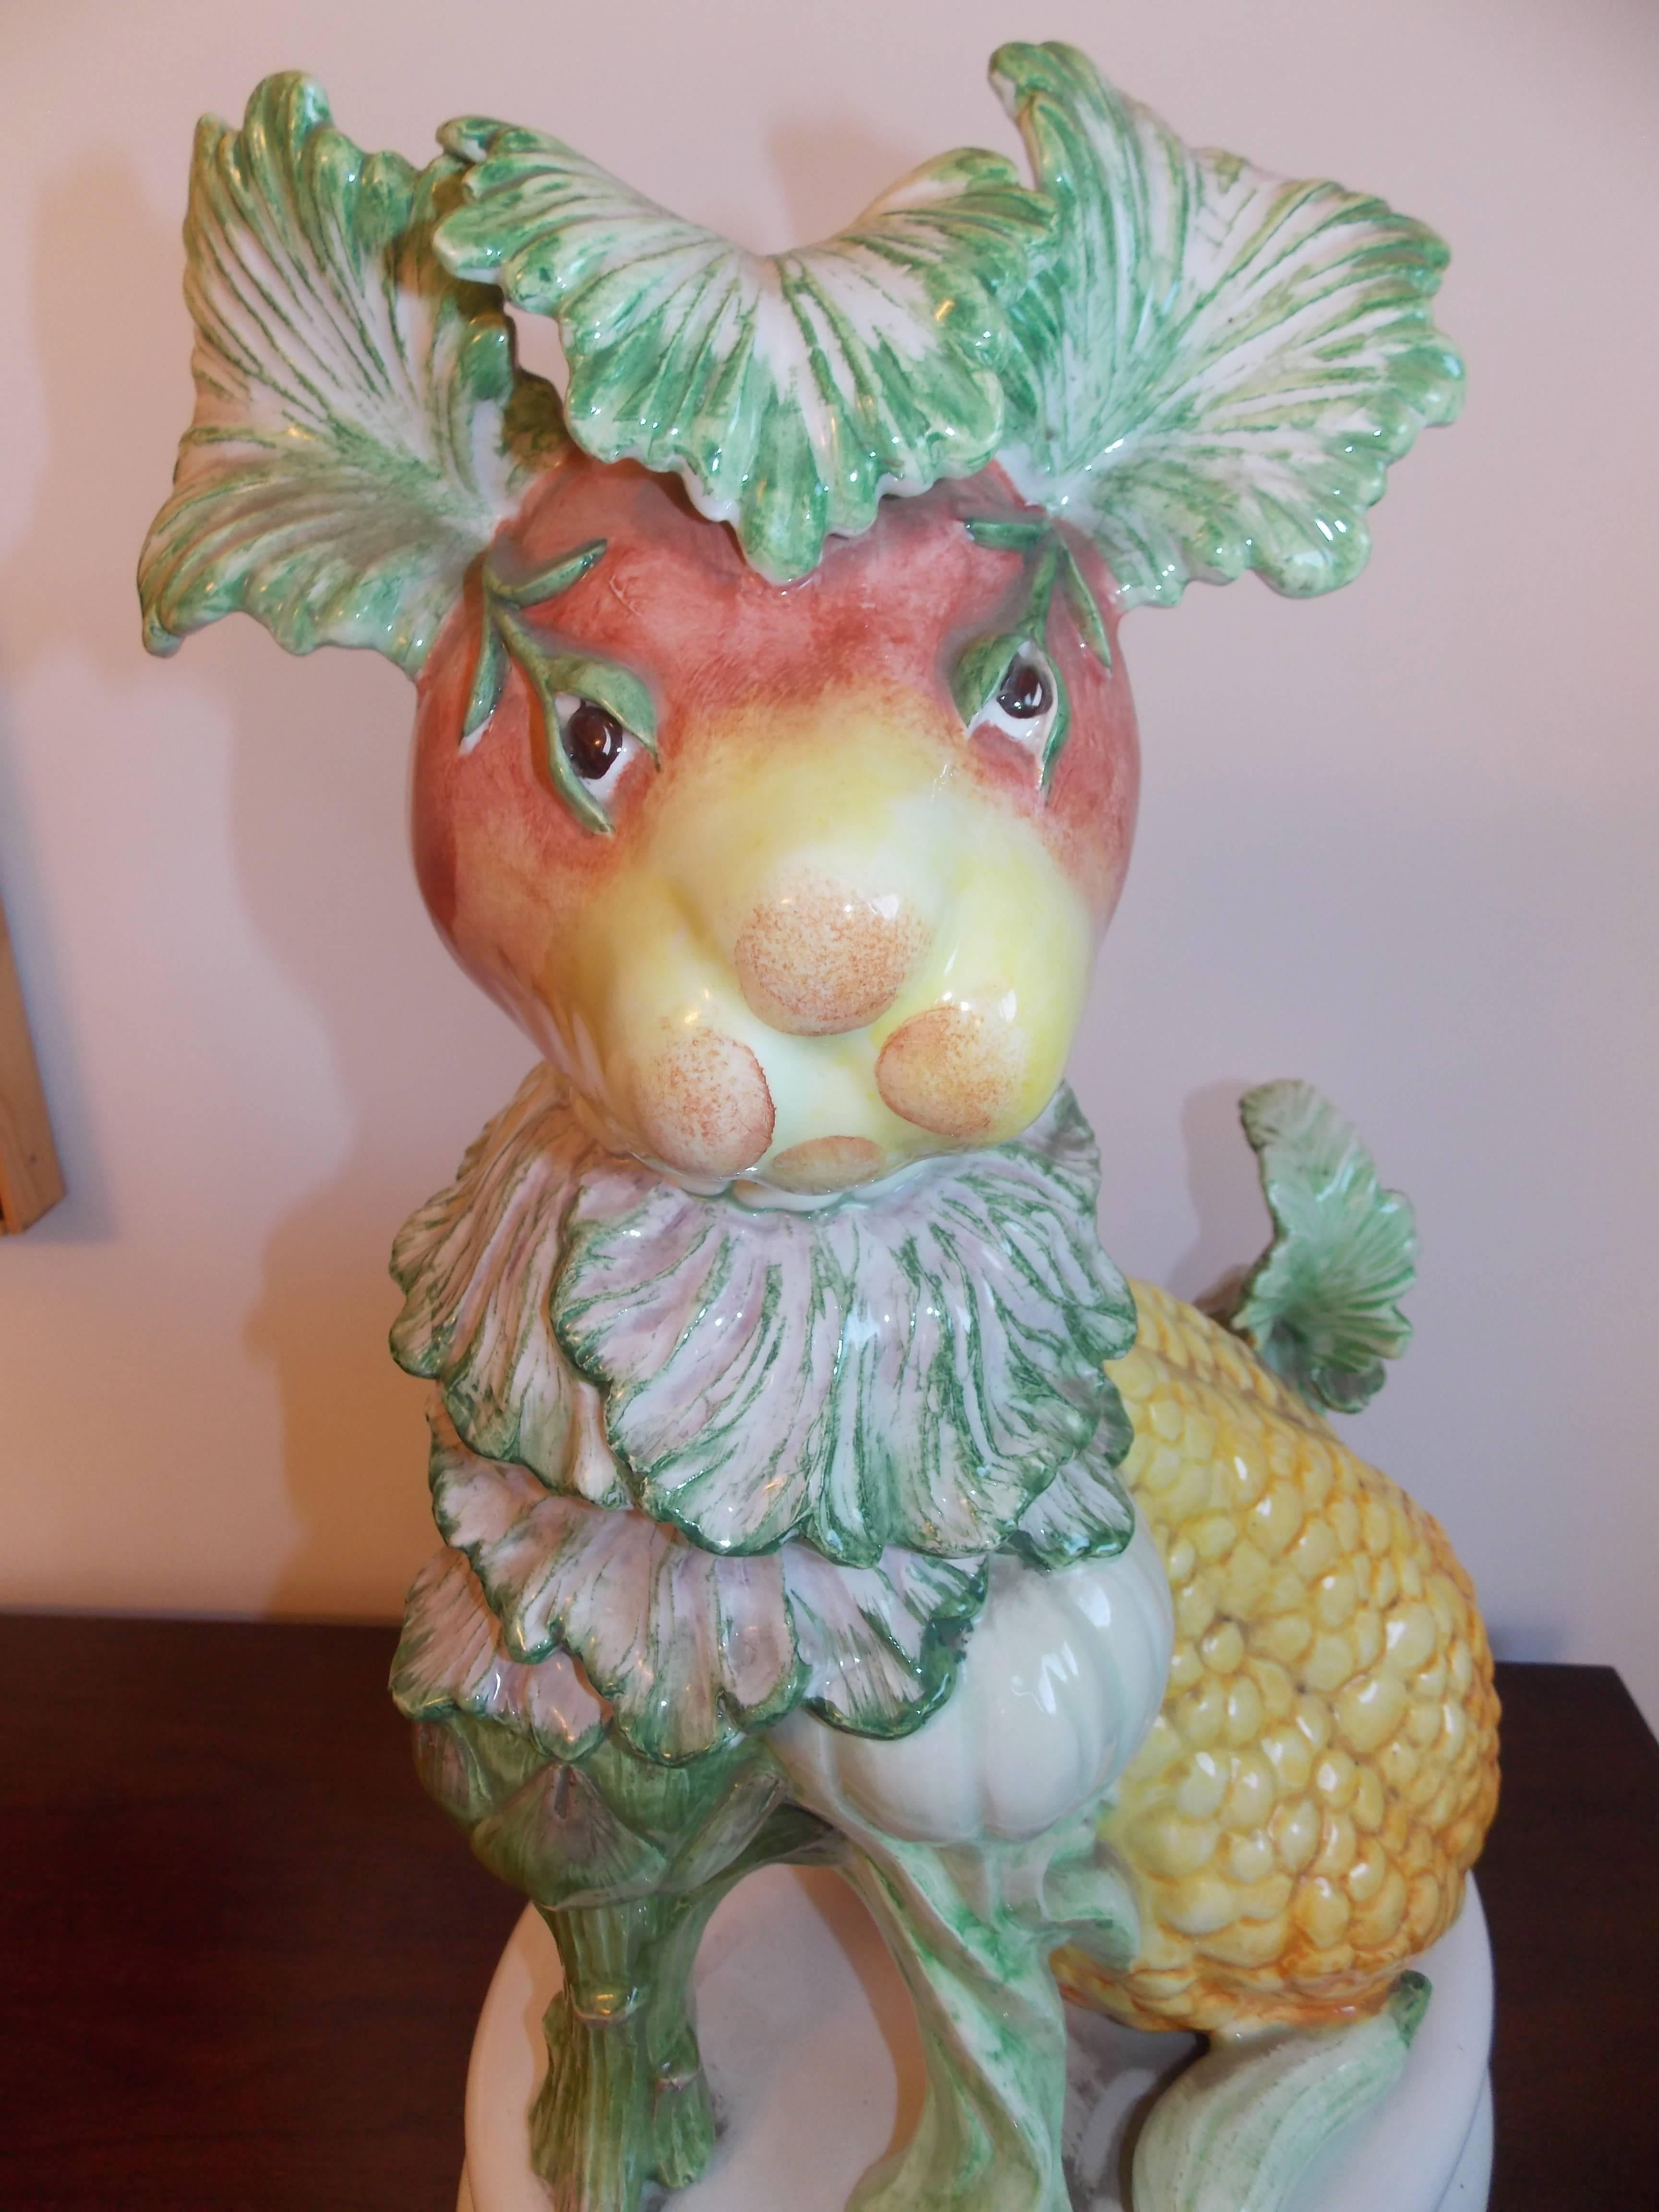 A fun piece of decorative art.
Reminiscent of Giuseppe Arcimboldo's paintings of portraits in fruit and vegetables.
Made of hand-painted ceramic.
No chips or cracks.